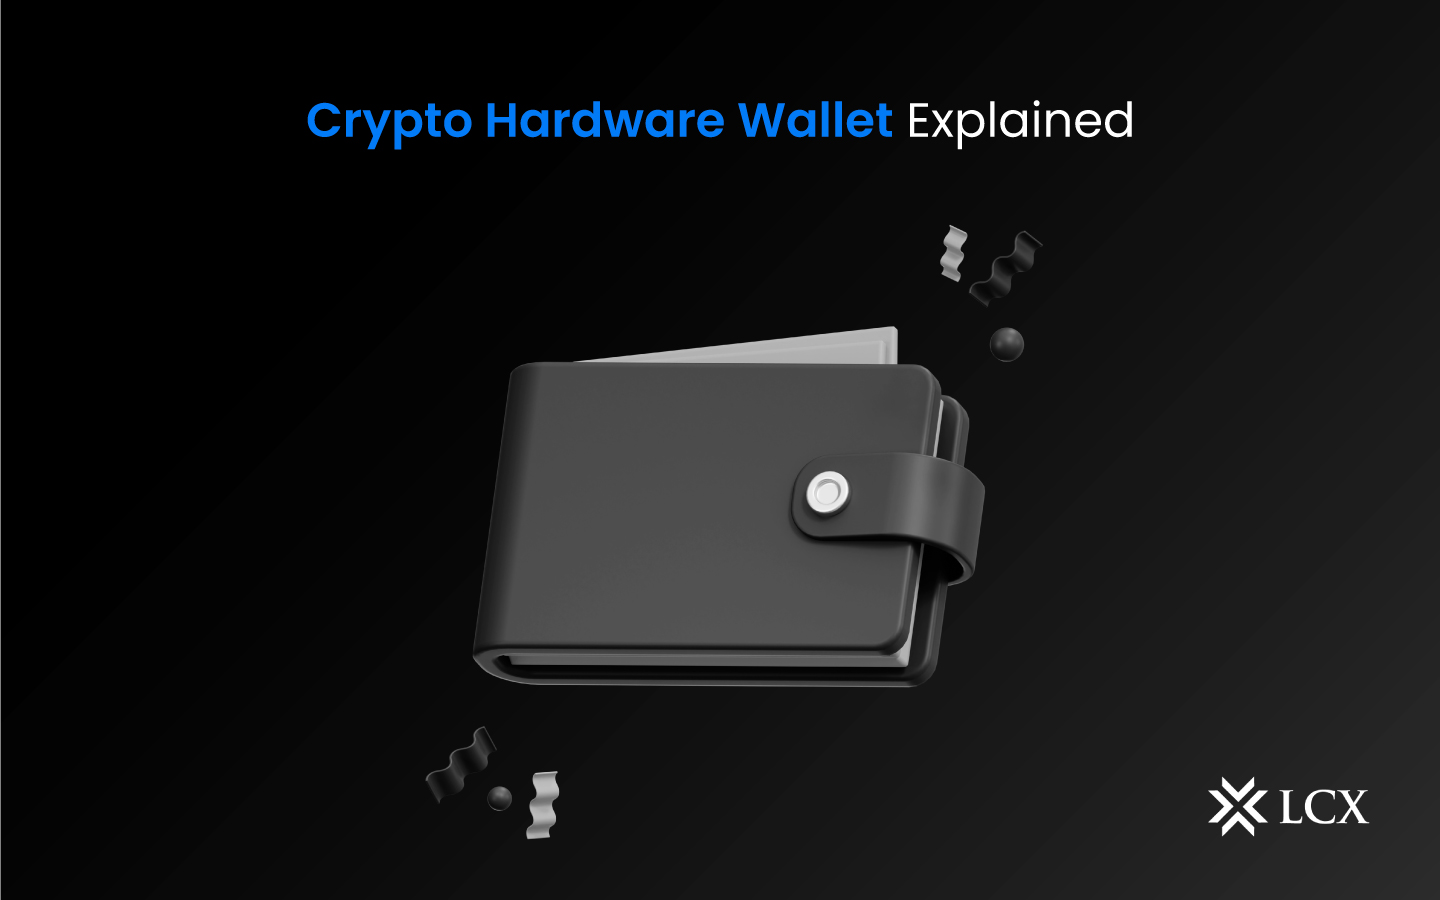 https://www.lcx.com/wp-content/uploads/20230529-Crypto-Hardware-Wallet-Explained.jpg